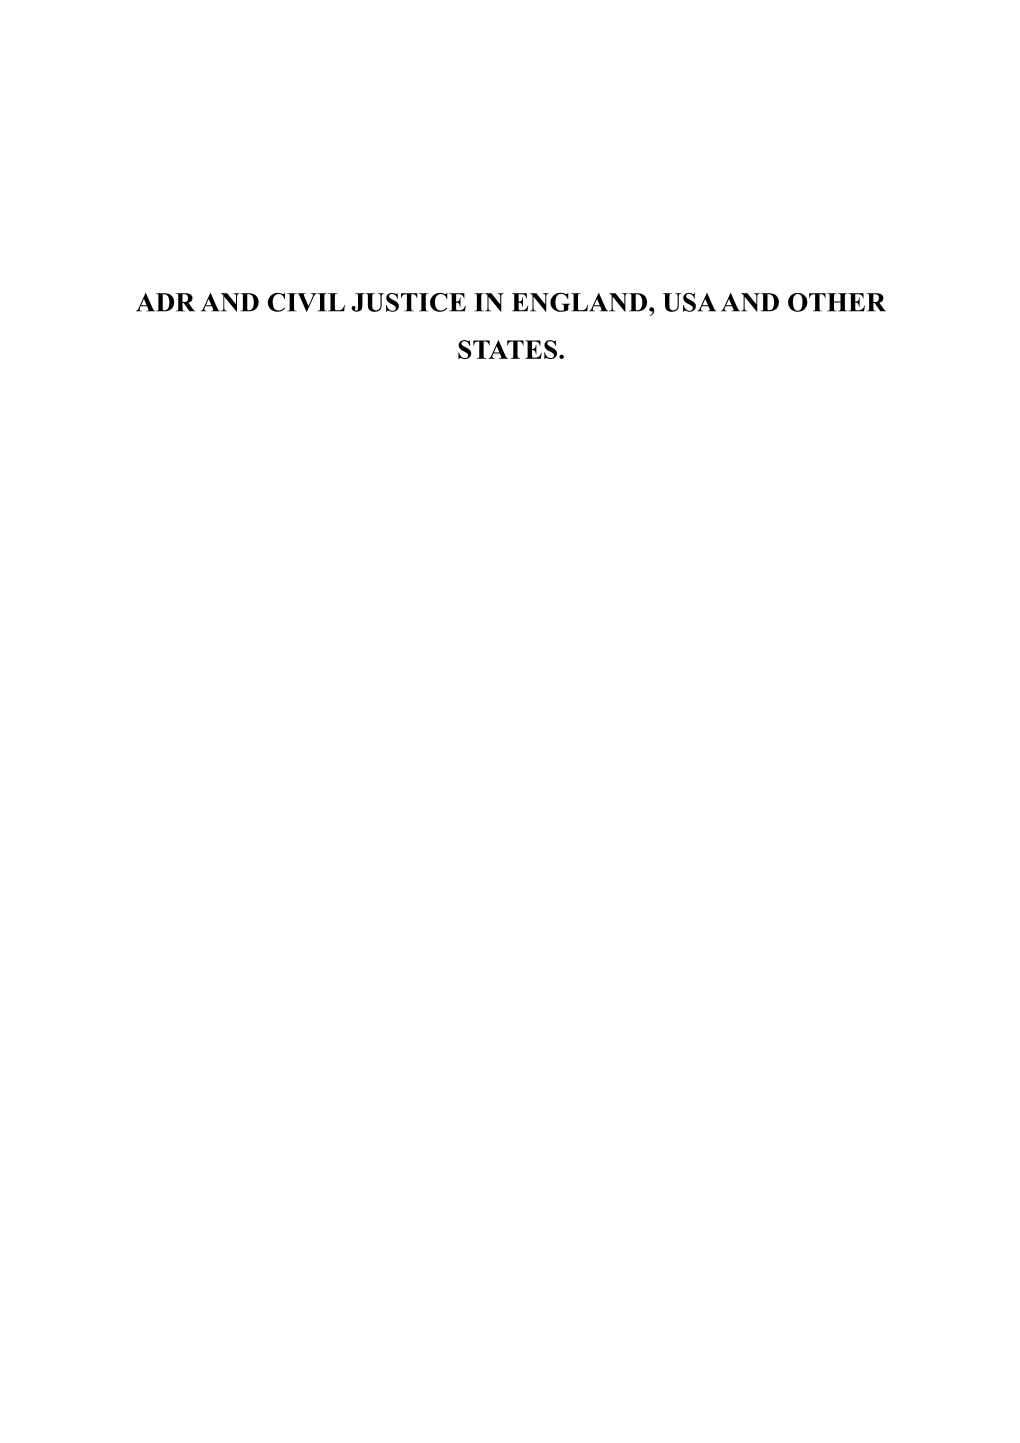 Adr and Civil Justice in England, Usa and Other States